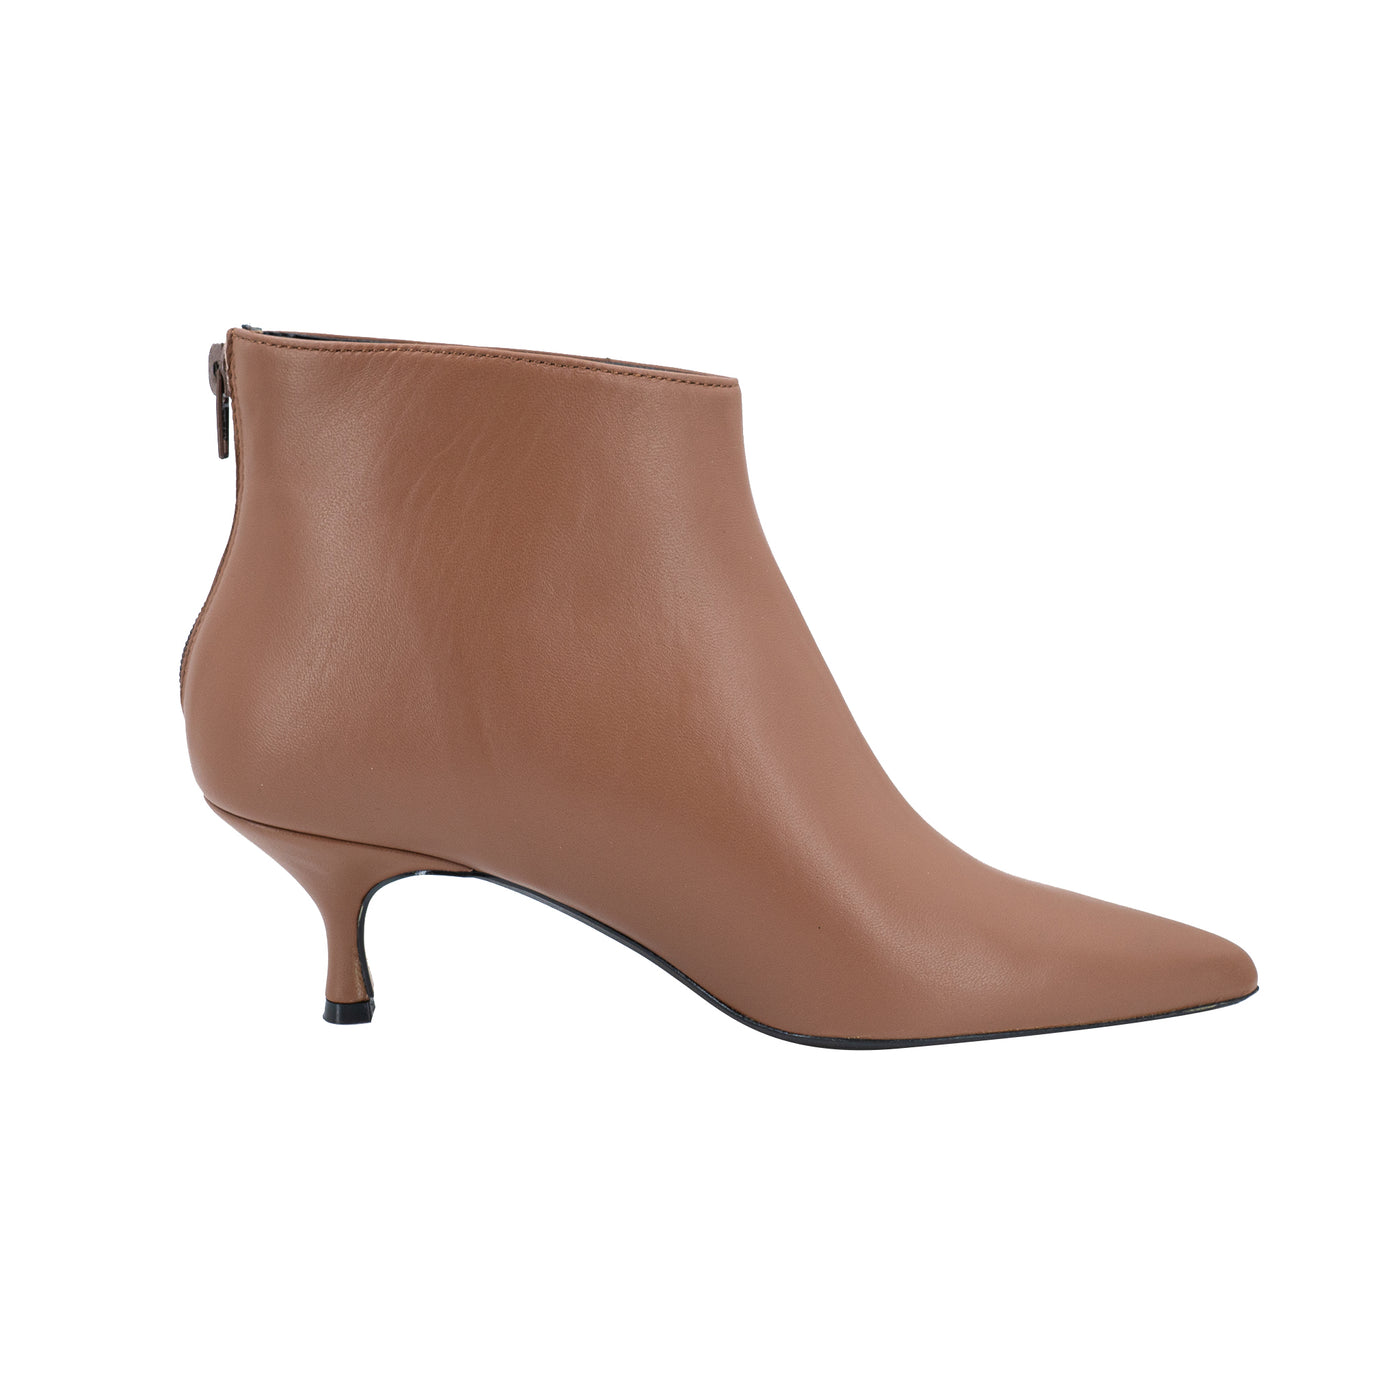 Women's ankle boots with low heel